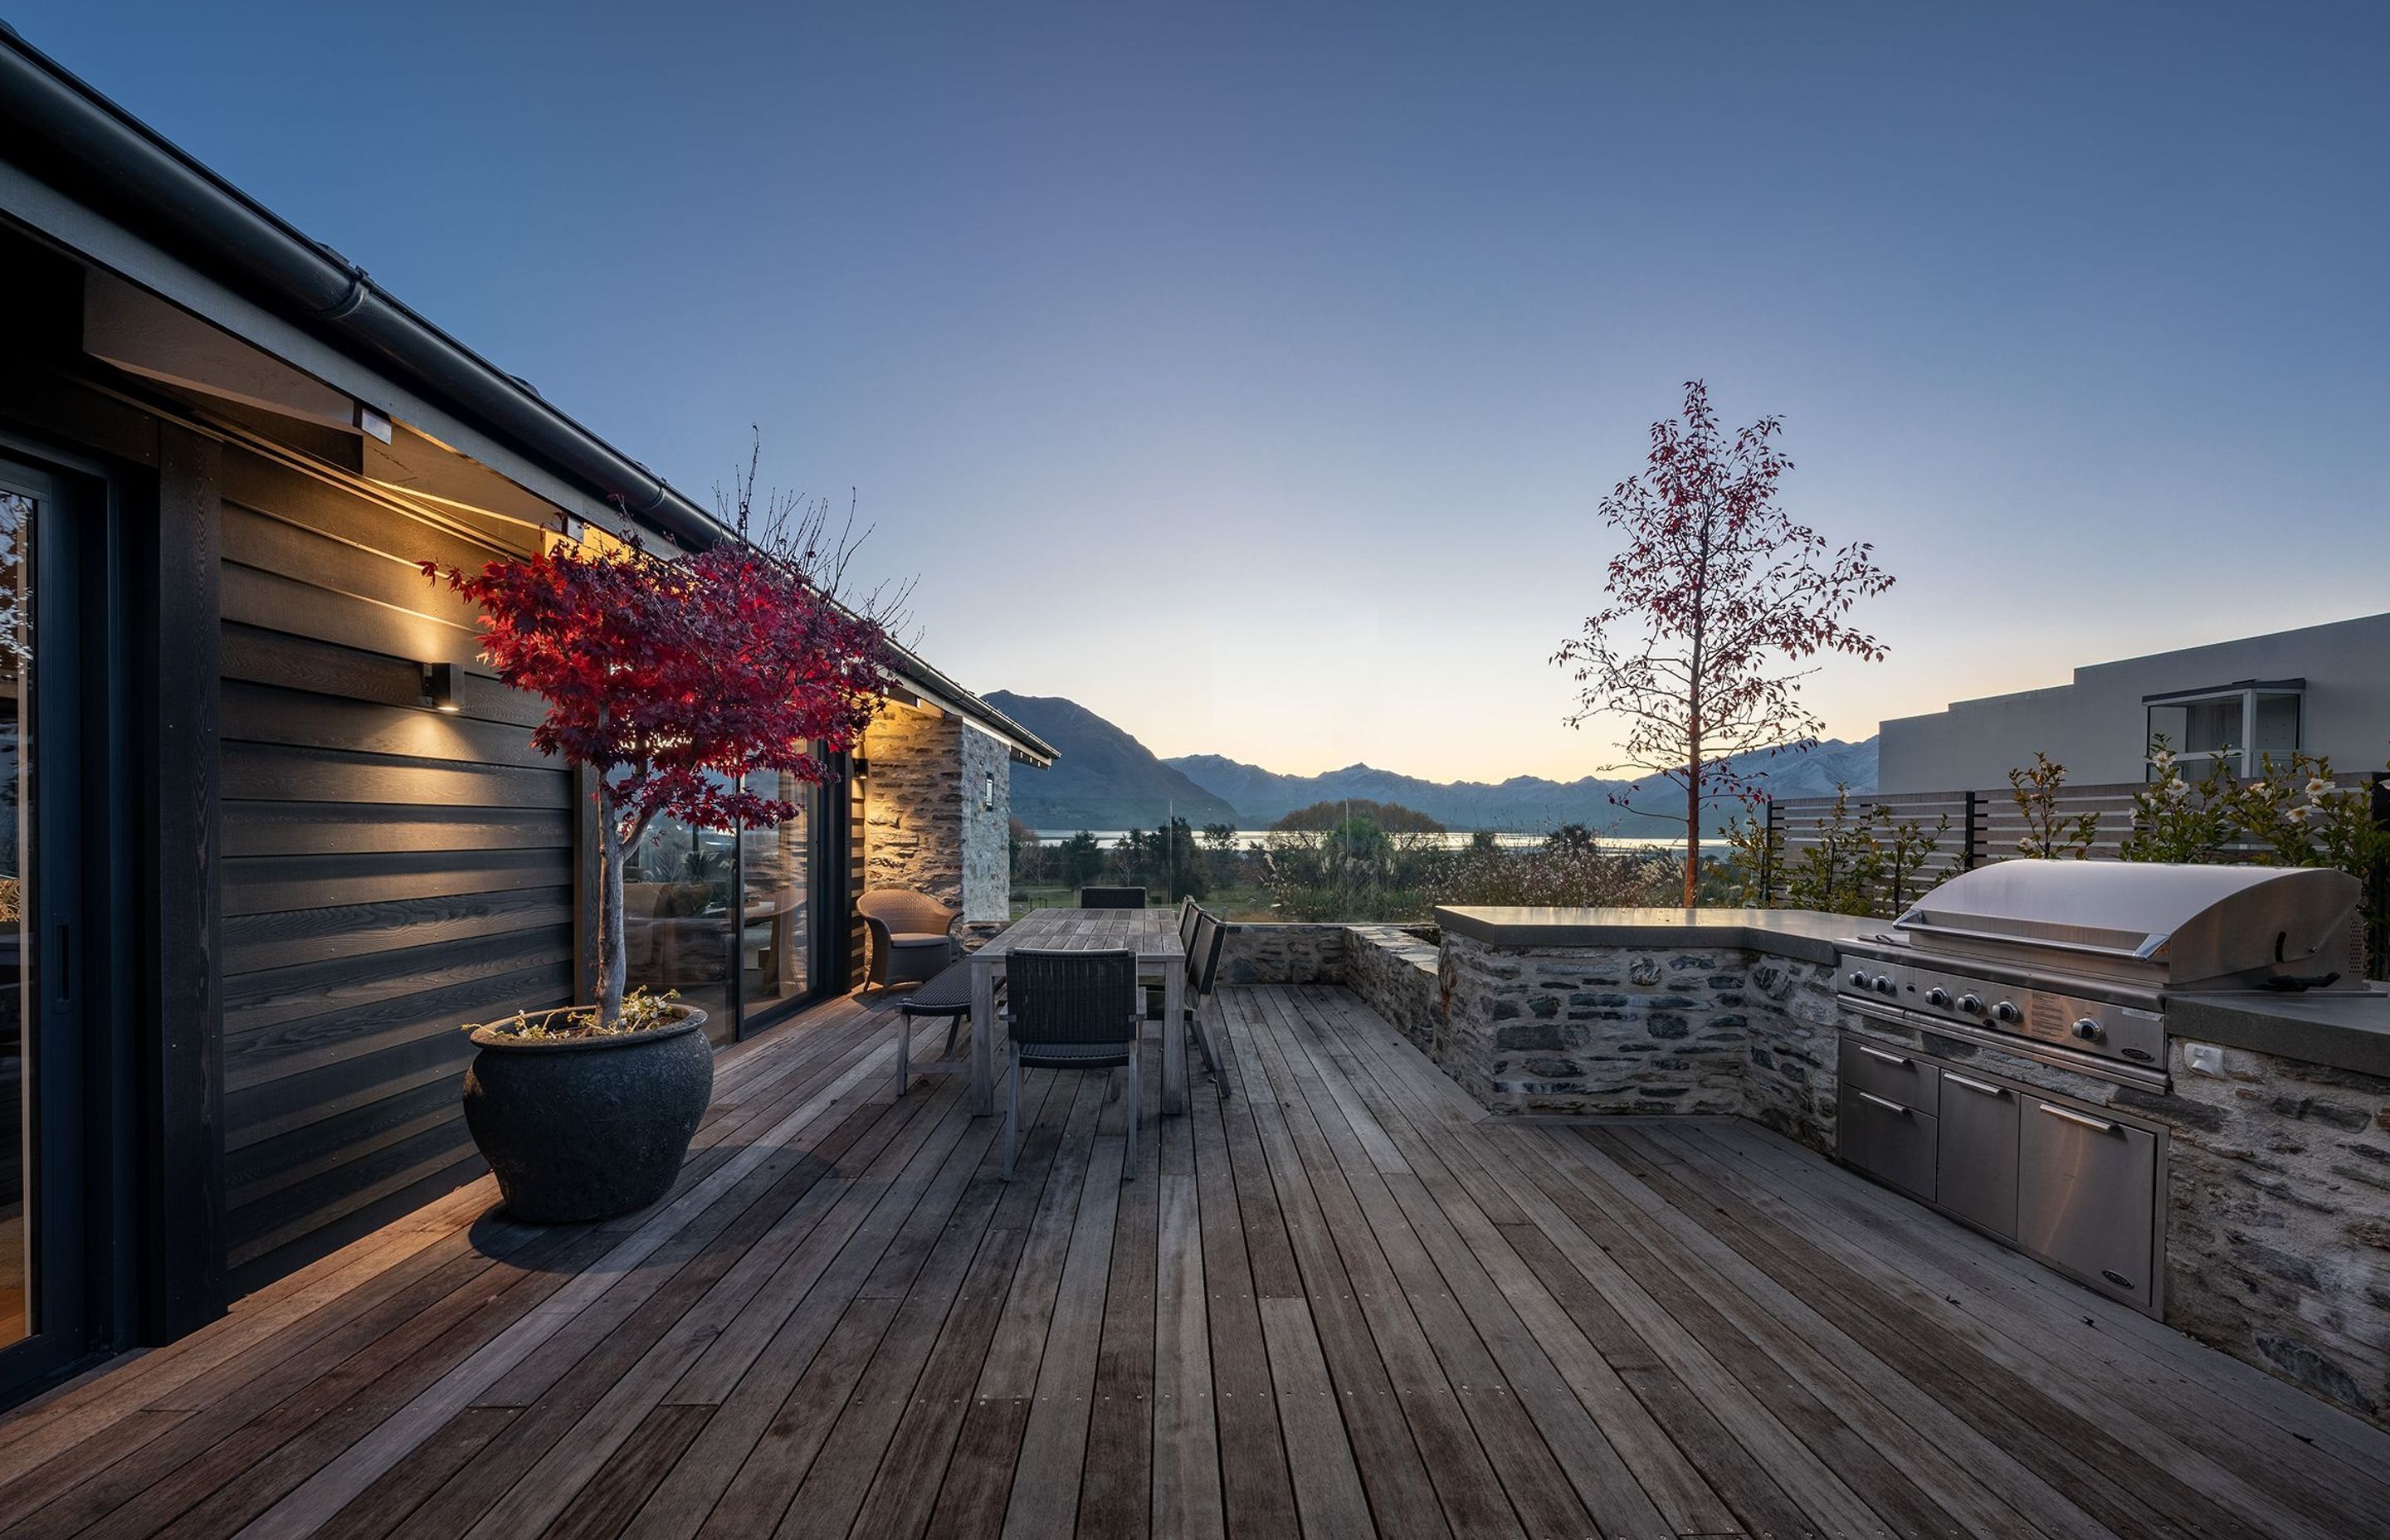 Situated off the main living area, the entertaining deck also revels in the enviable views.